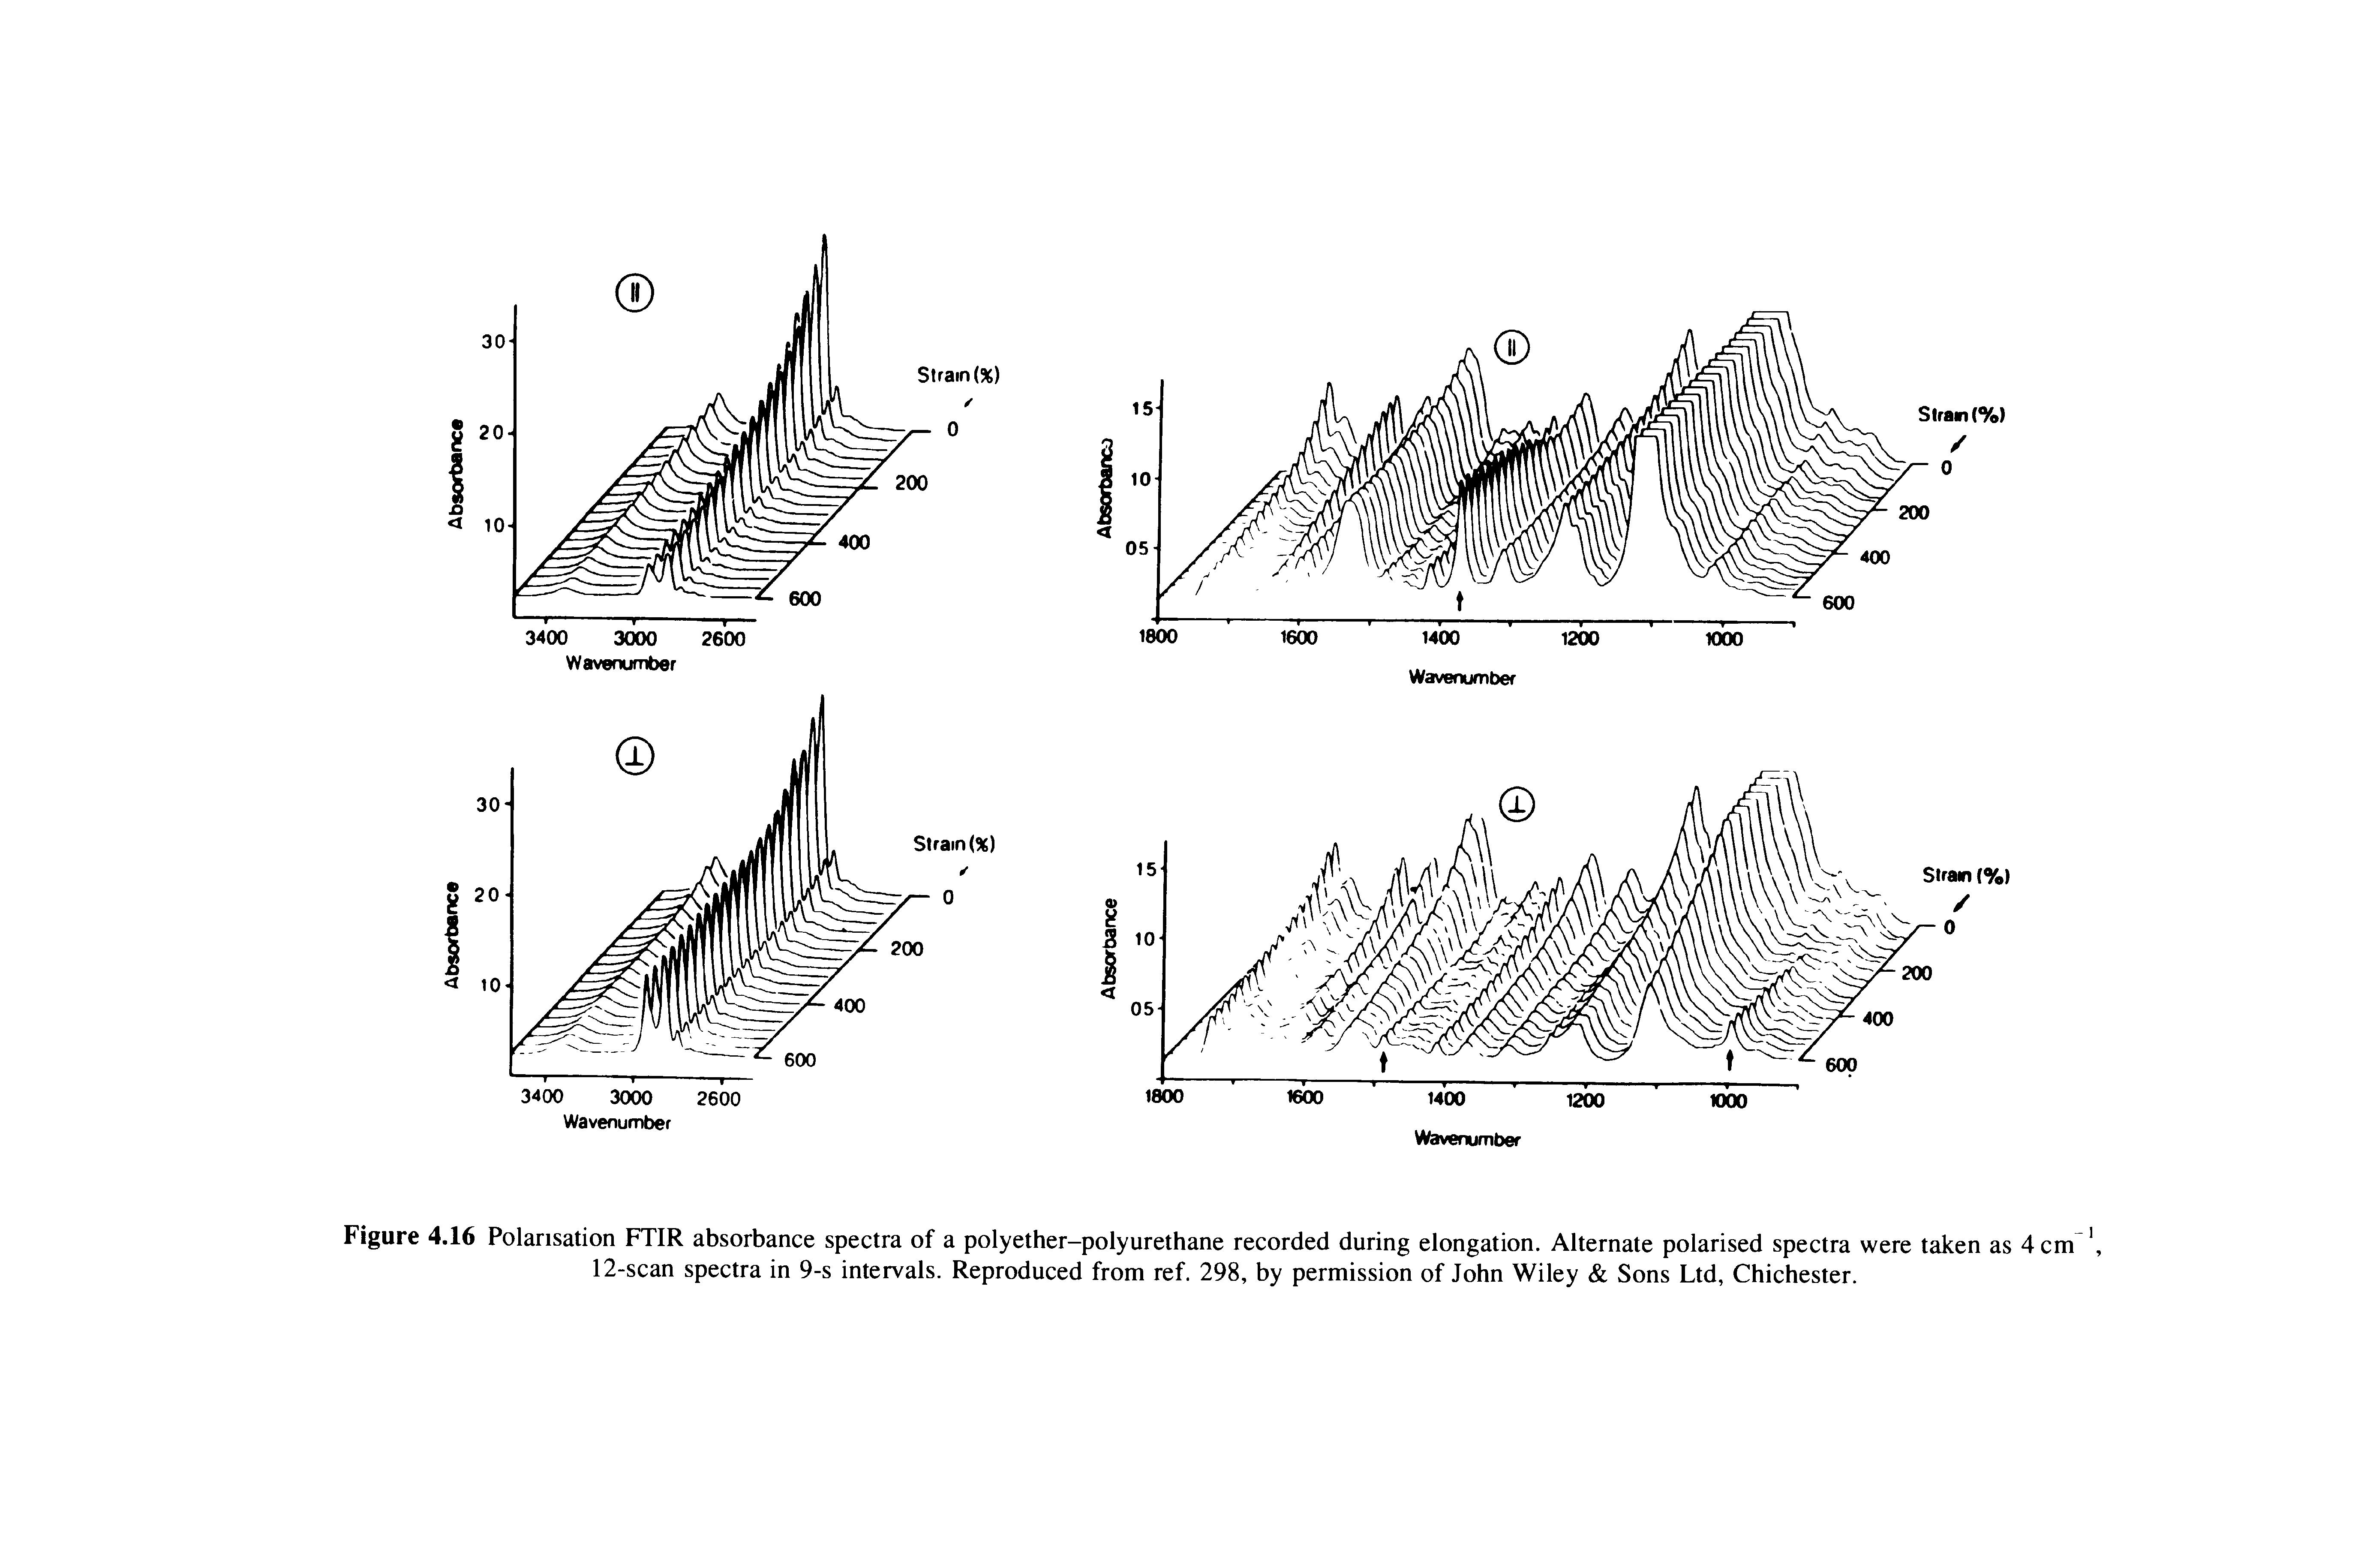 Figure 4.16 Polarisation FTIR absorbance spectra of a polyether-polyurethane recorded during elongation. Alternate polarised spectra were taken as 4 cm 12-scan spectra in 9-s intervals. Reproduced from ref. 298, by permission of John Wiley Sons Ltd, Chichester.